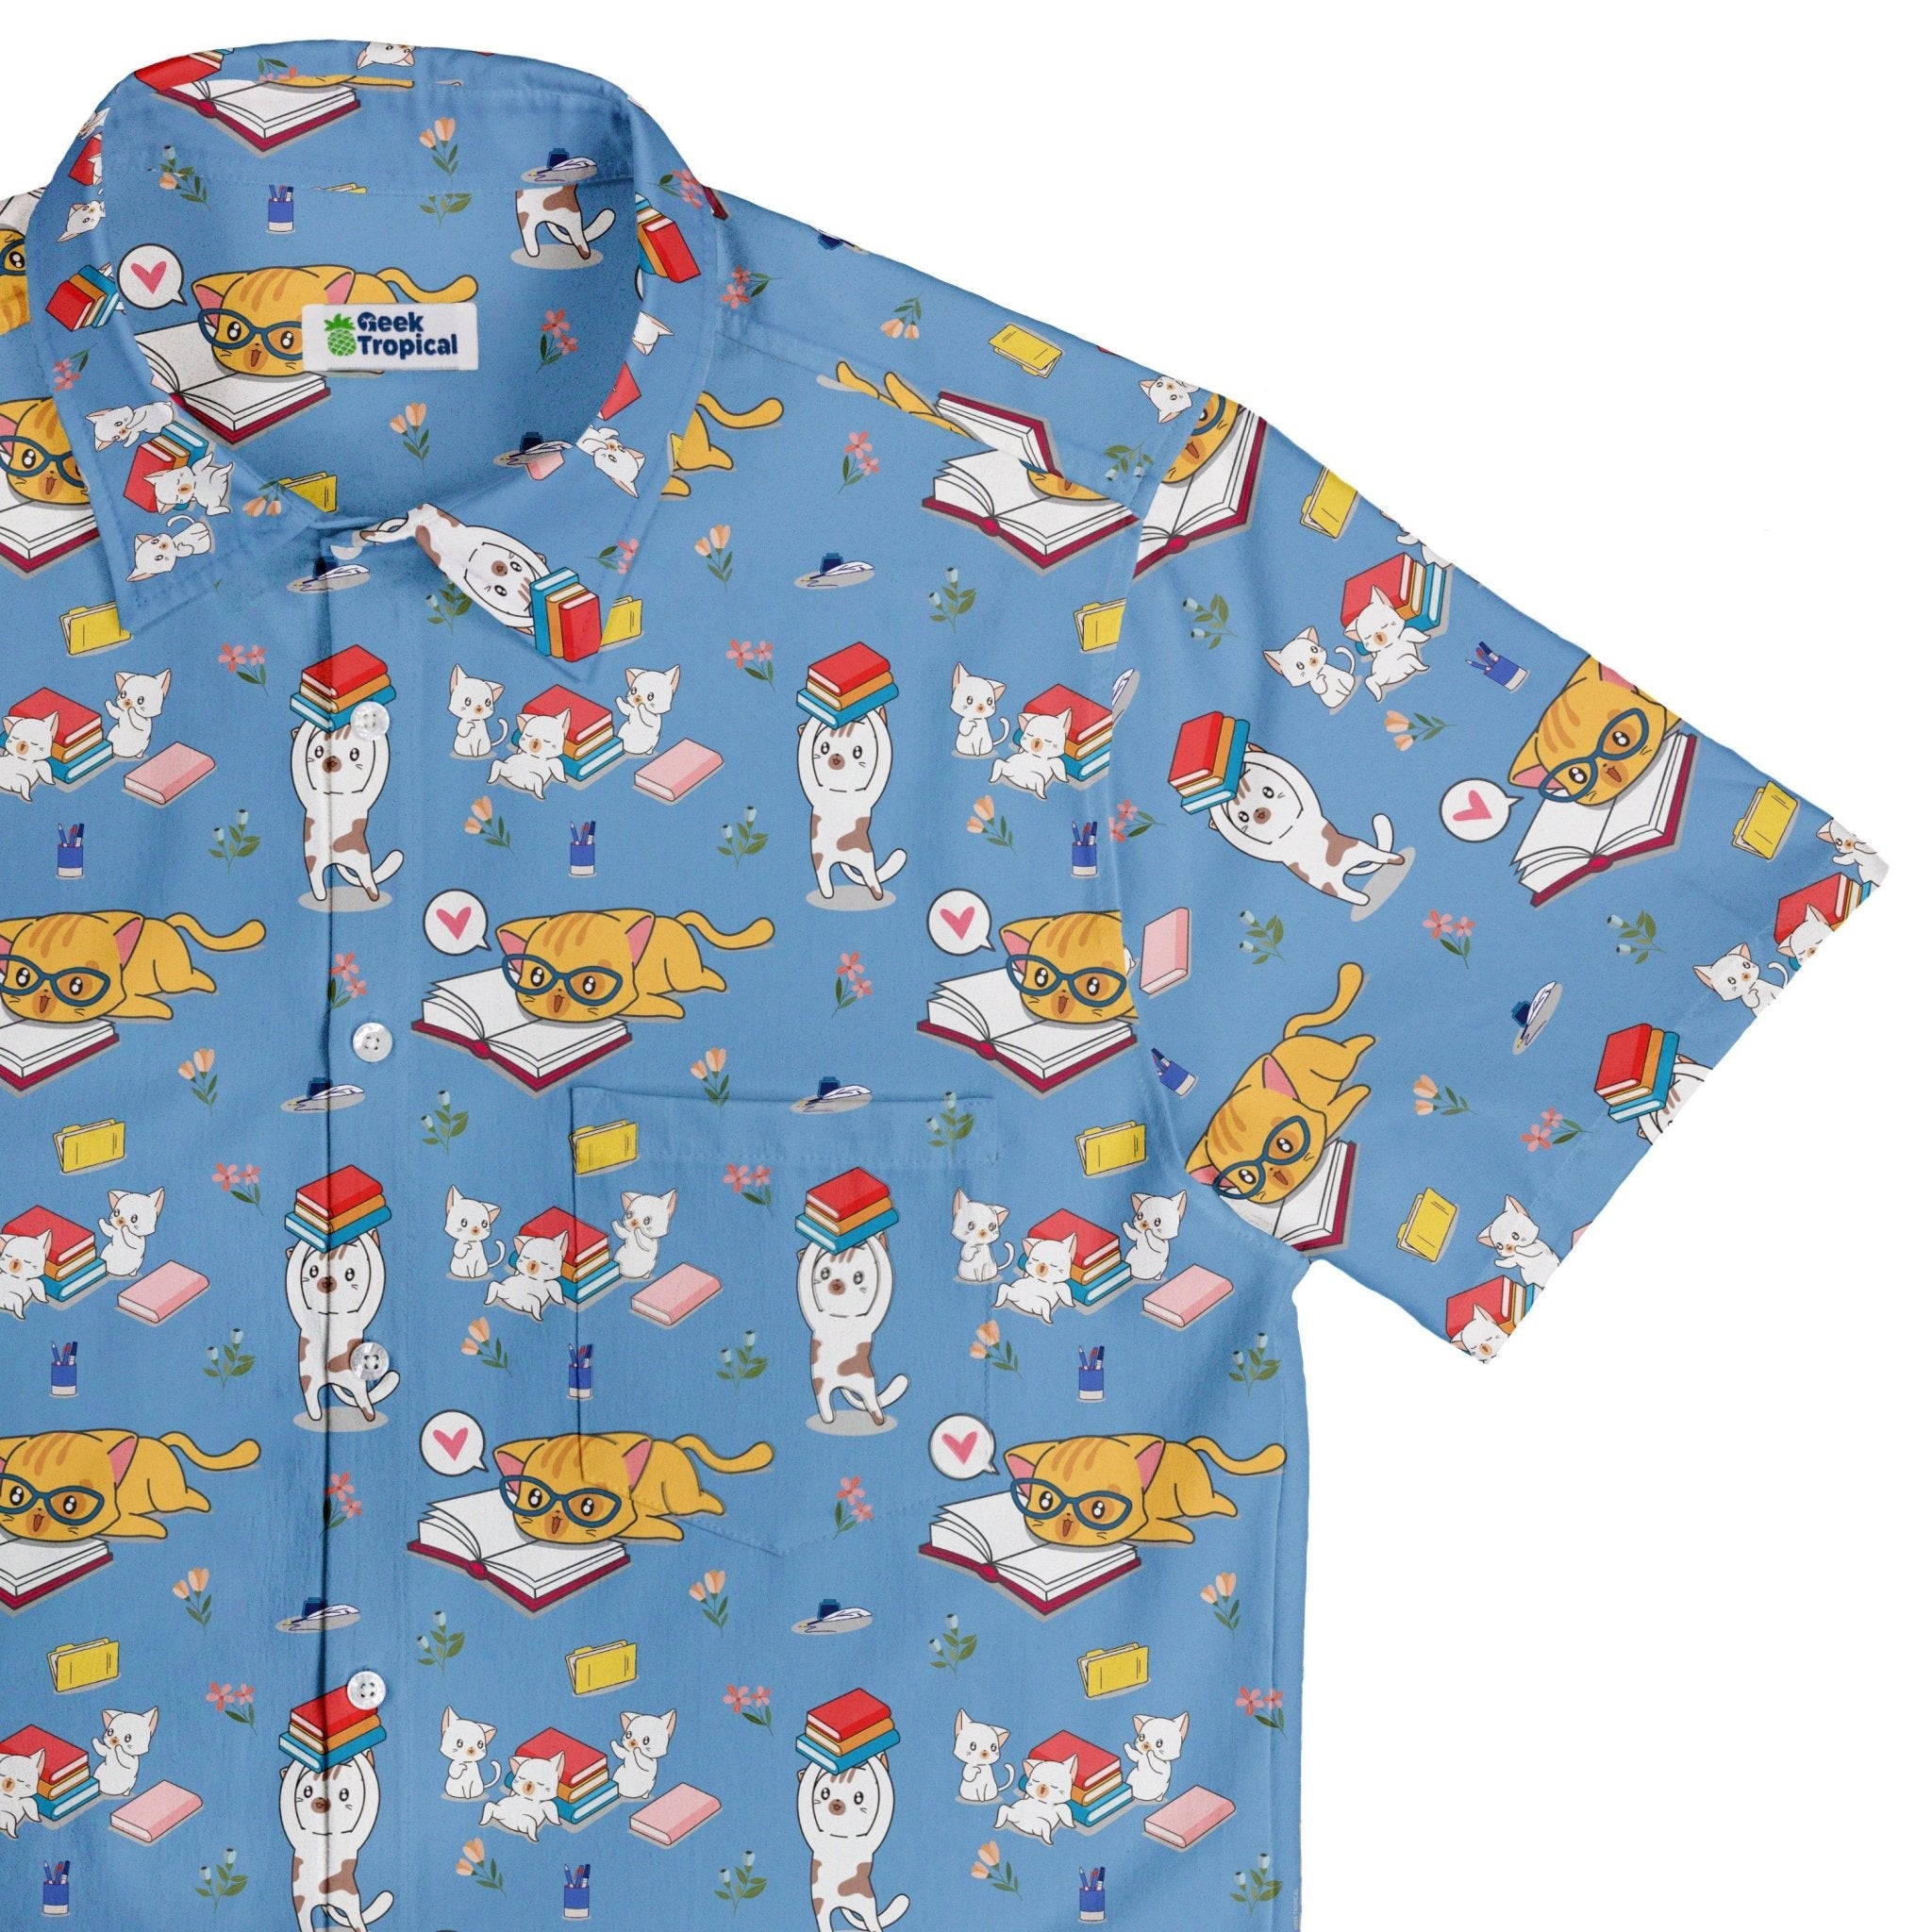 Book Nerd Cats Button Up Shirt - adult sizing - Animal Patterns - Book Prints